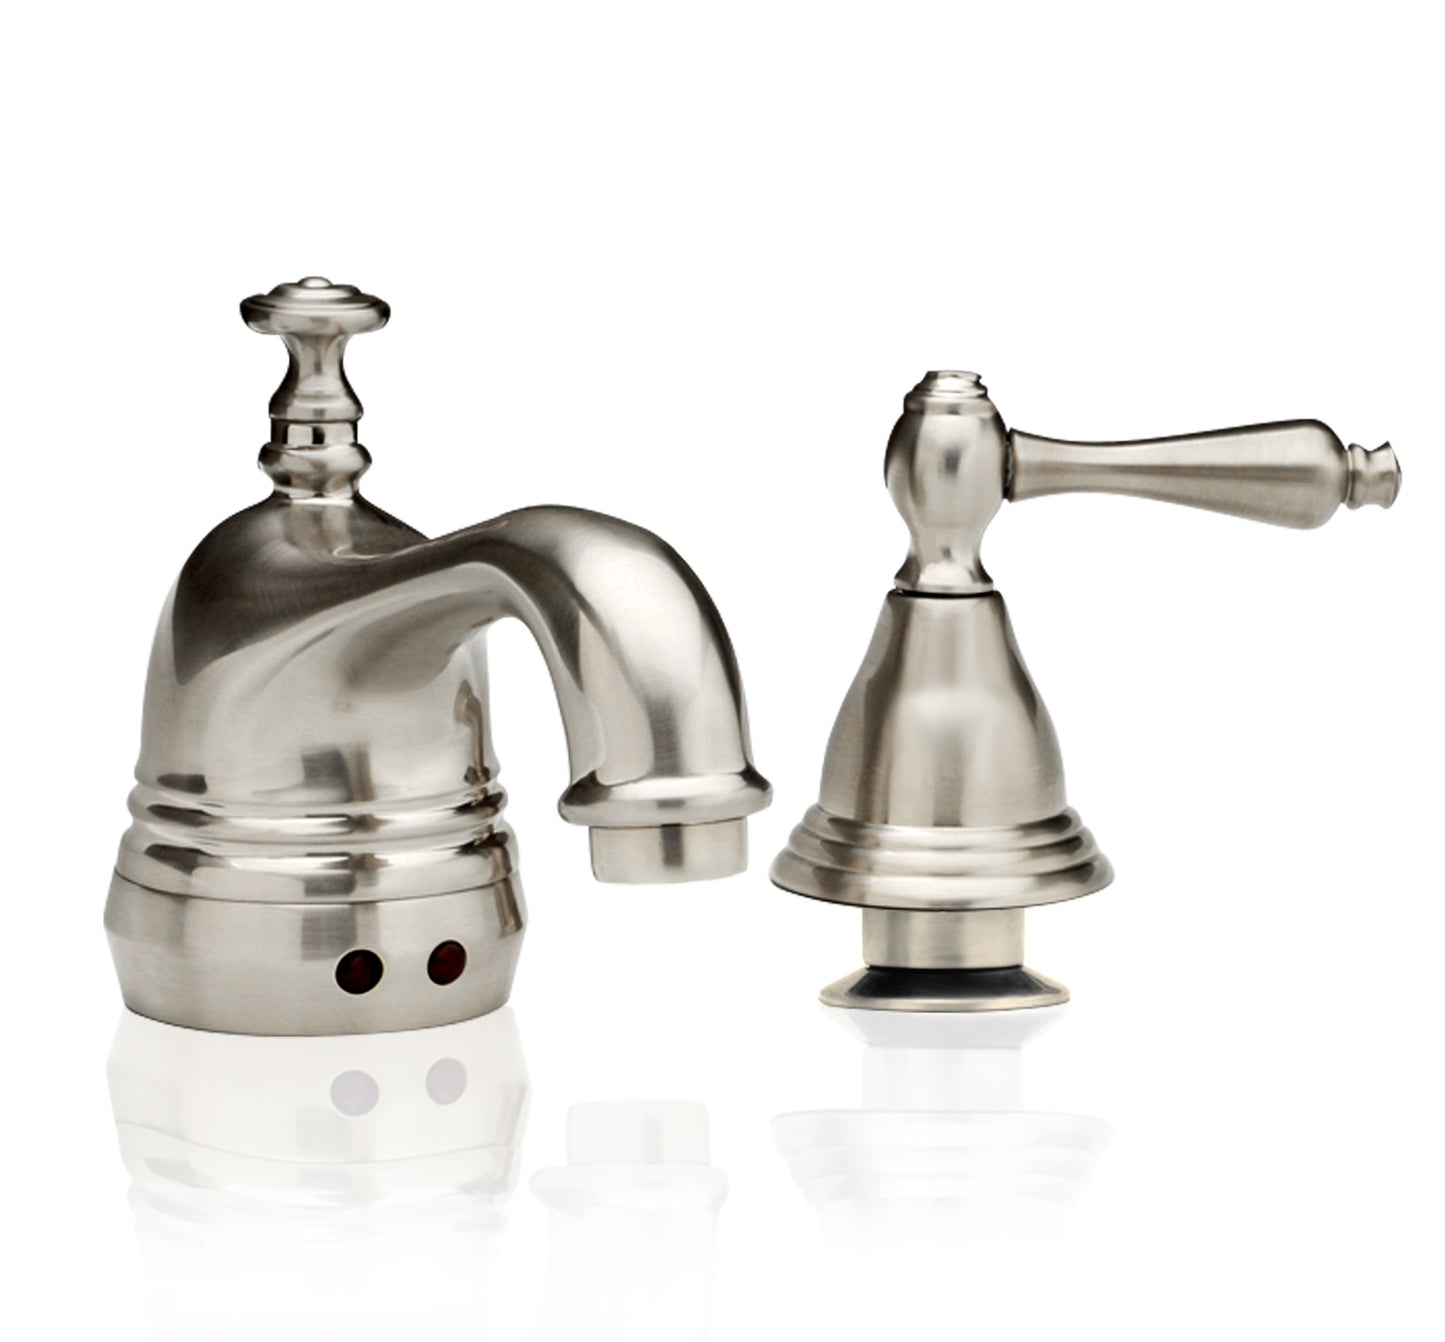 Euro Style Automatic Faucet with Soap Dispenser FA400-103s